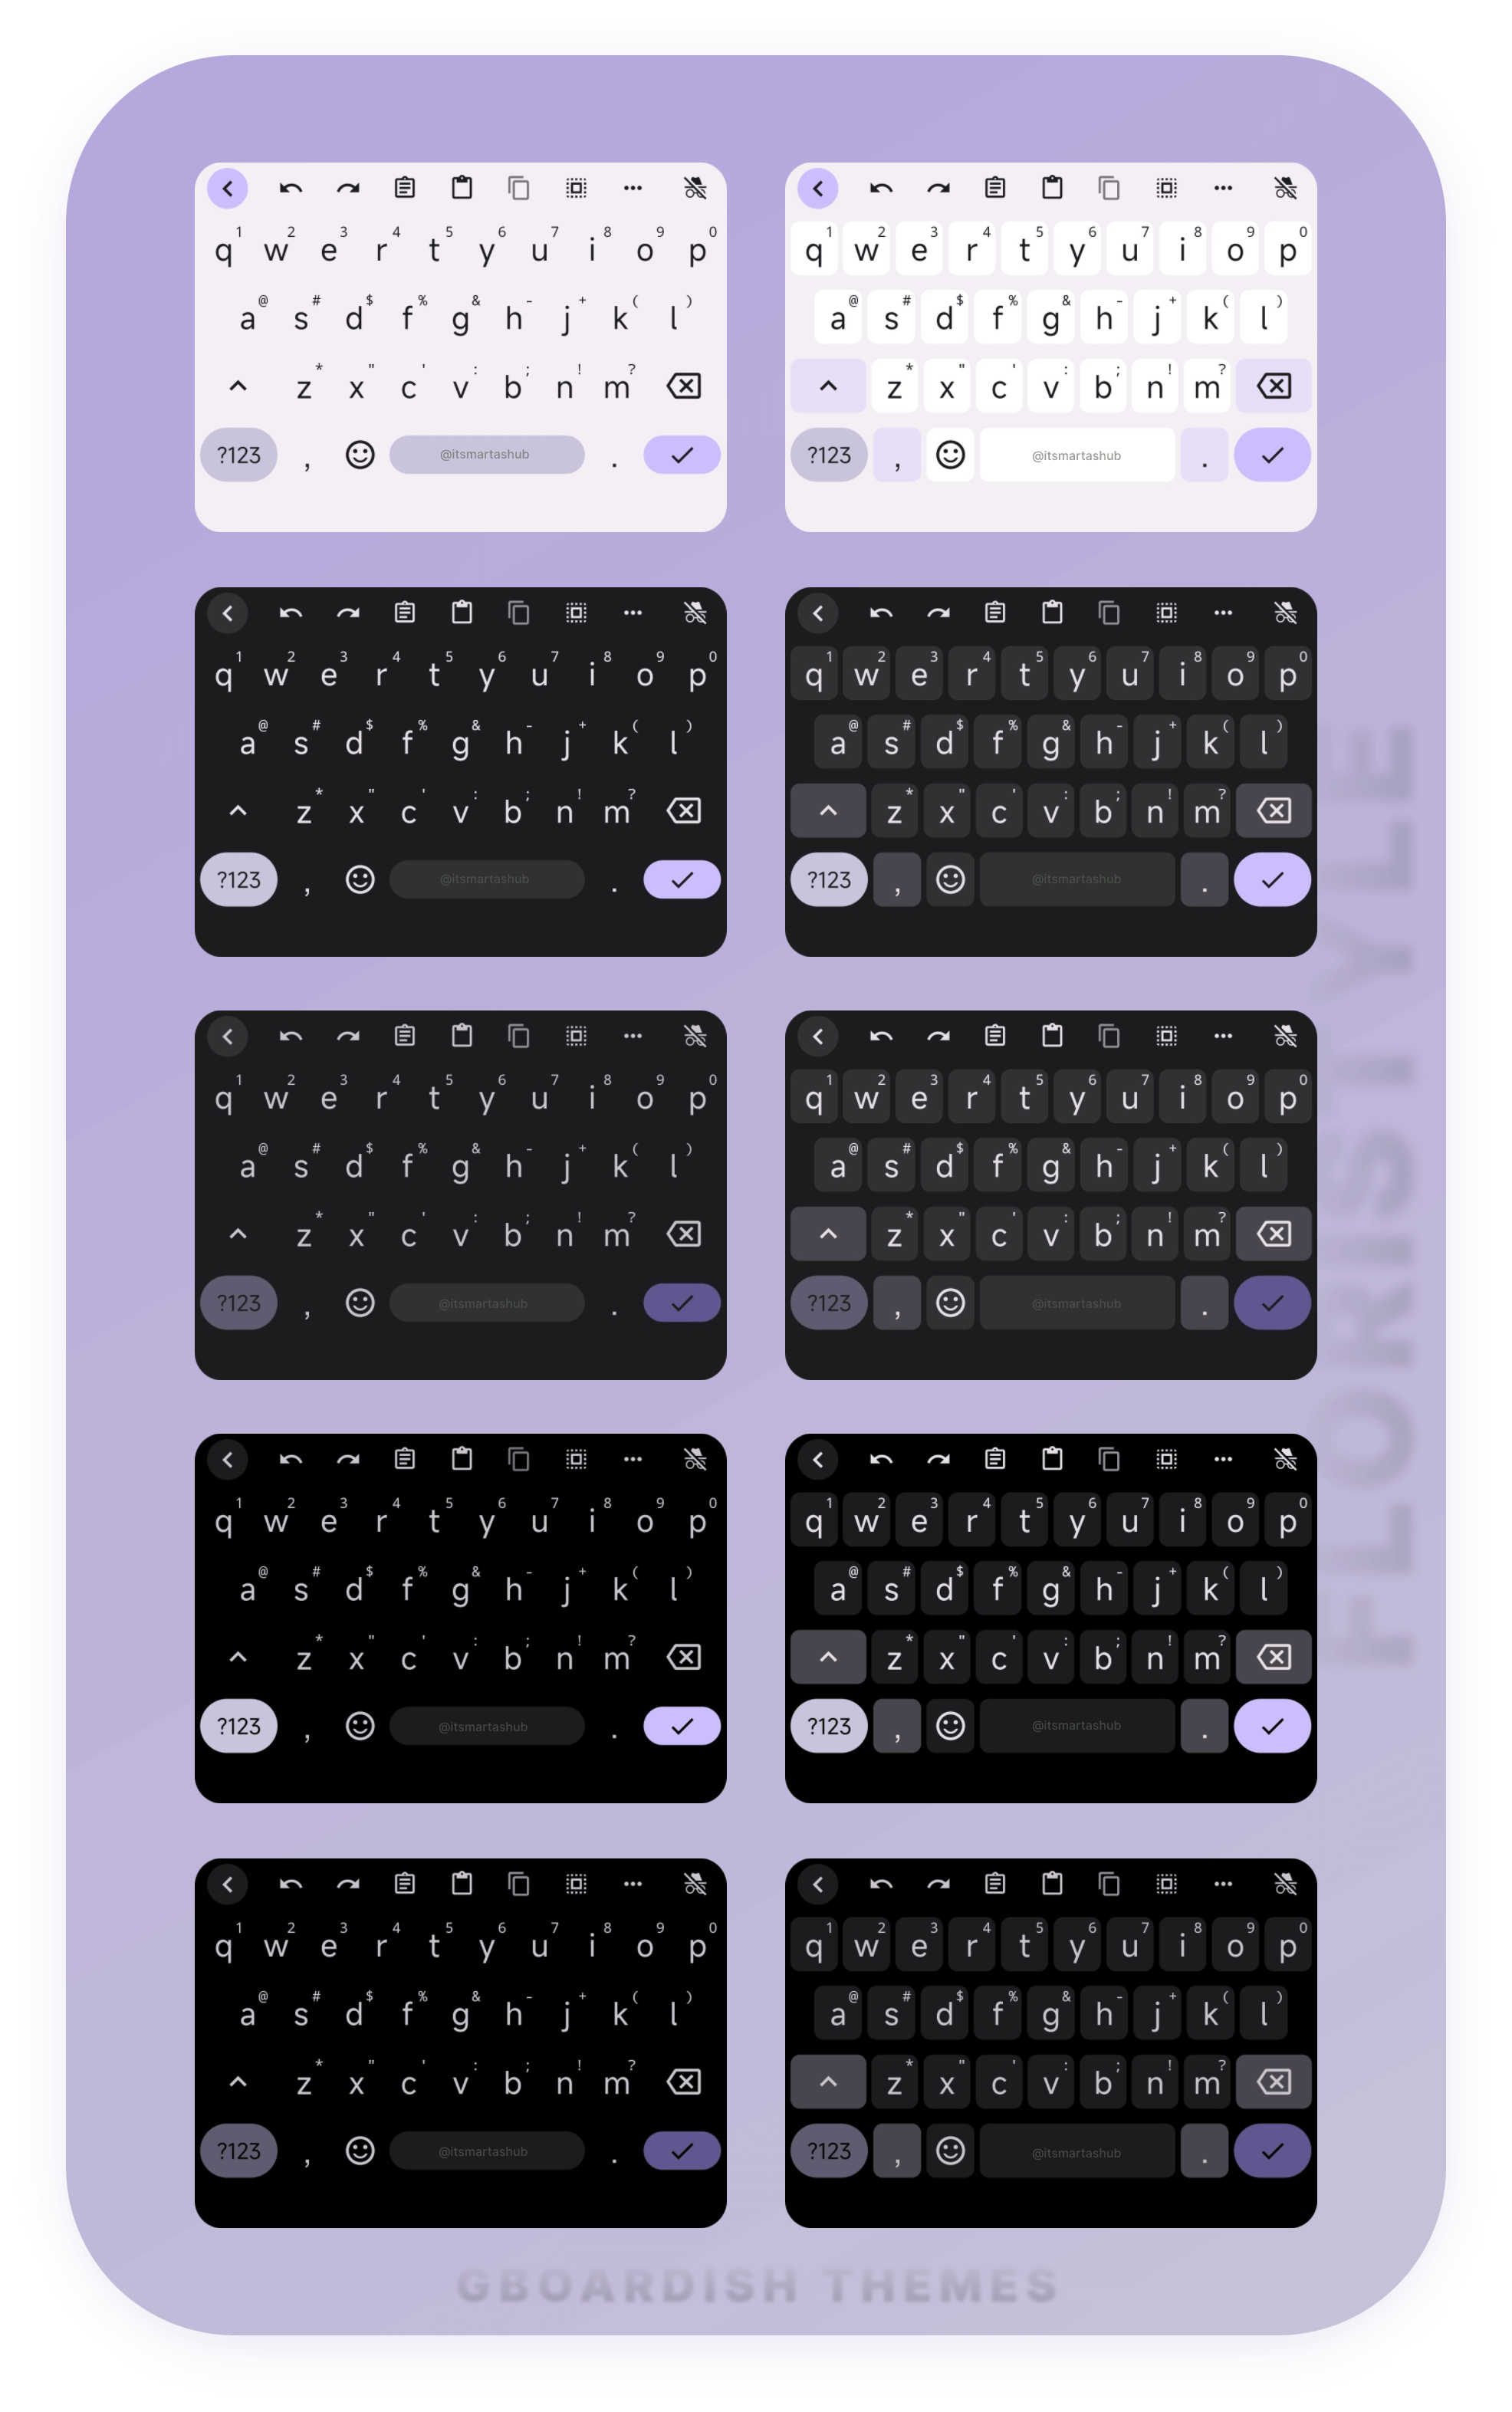 floristyled-material-you-keyboard-themes-with-light-dark-and-amoled-modes-based-on-purplish-home-wallpaper